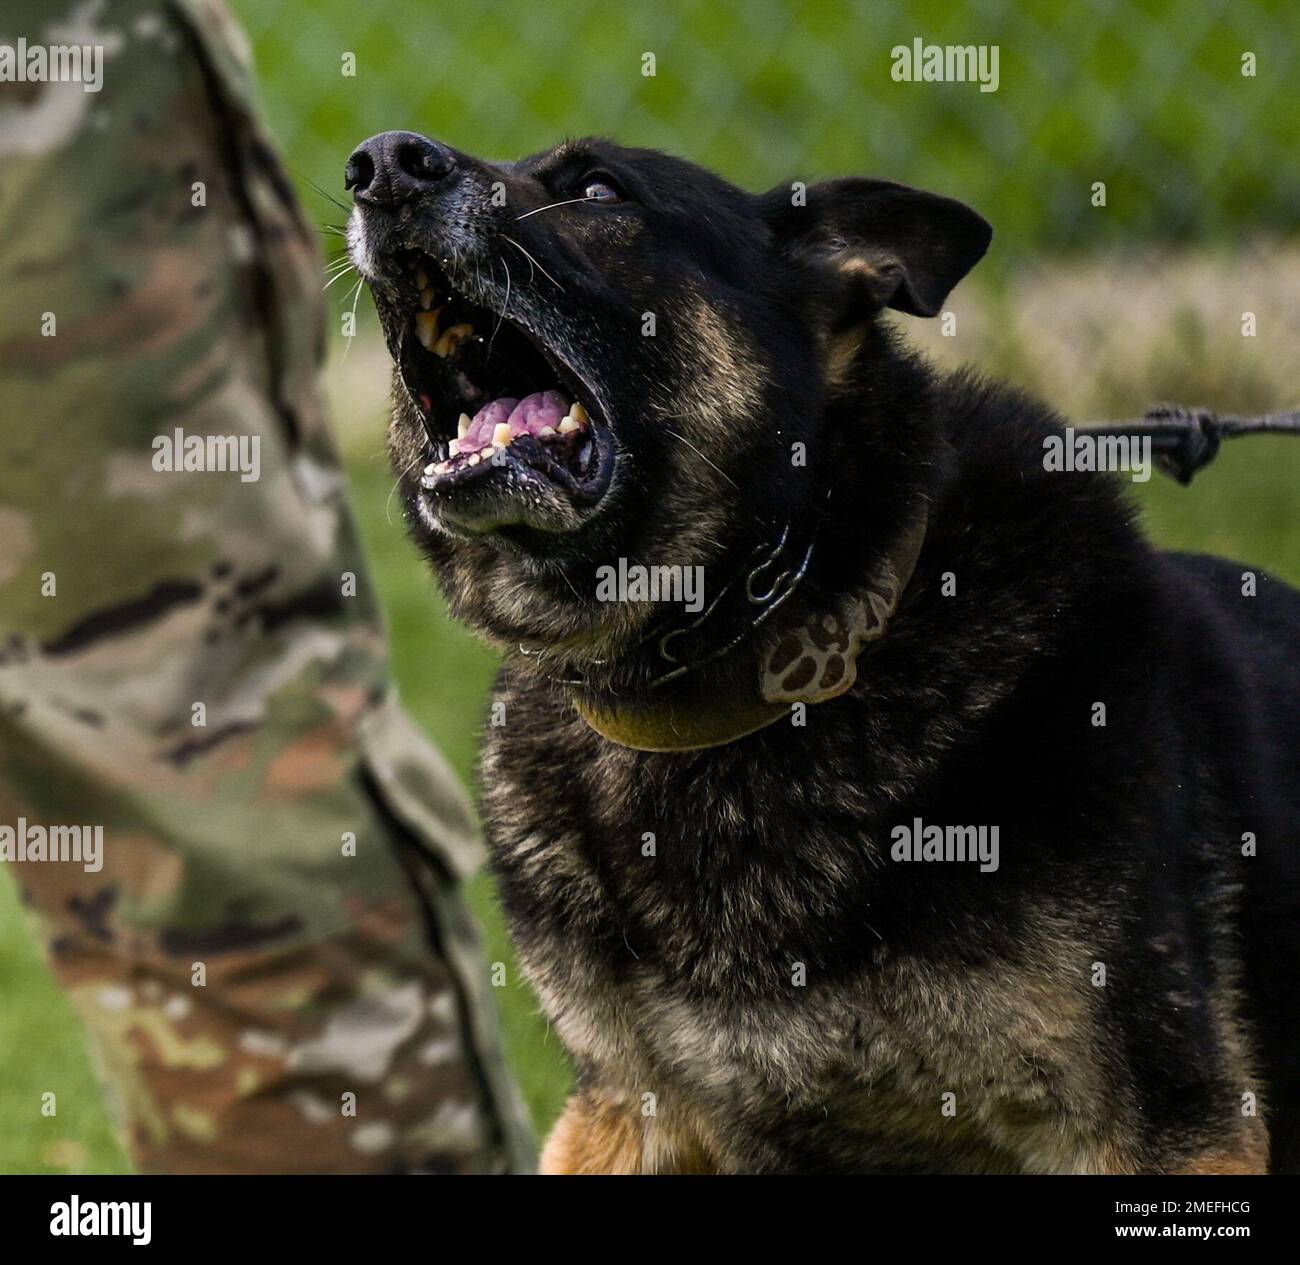 U.S. Air Force Military Working Dog, Jony, assigned to the 633d Security Forces Squadron barks on command at Joint Base Langley-Eustis, Virginia, Aug. 16, 2022. Jony has served two years at JBLE and six years in the U.S. Marine Corps as a dual purpose MWD and has multiple secret service missions under his collar. Stock Photo